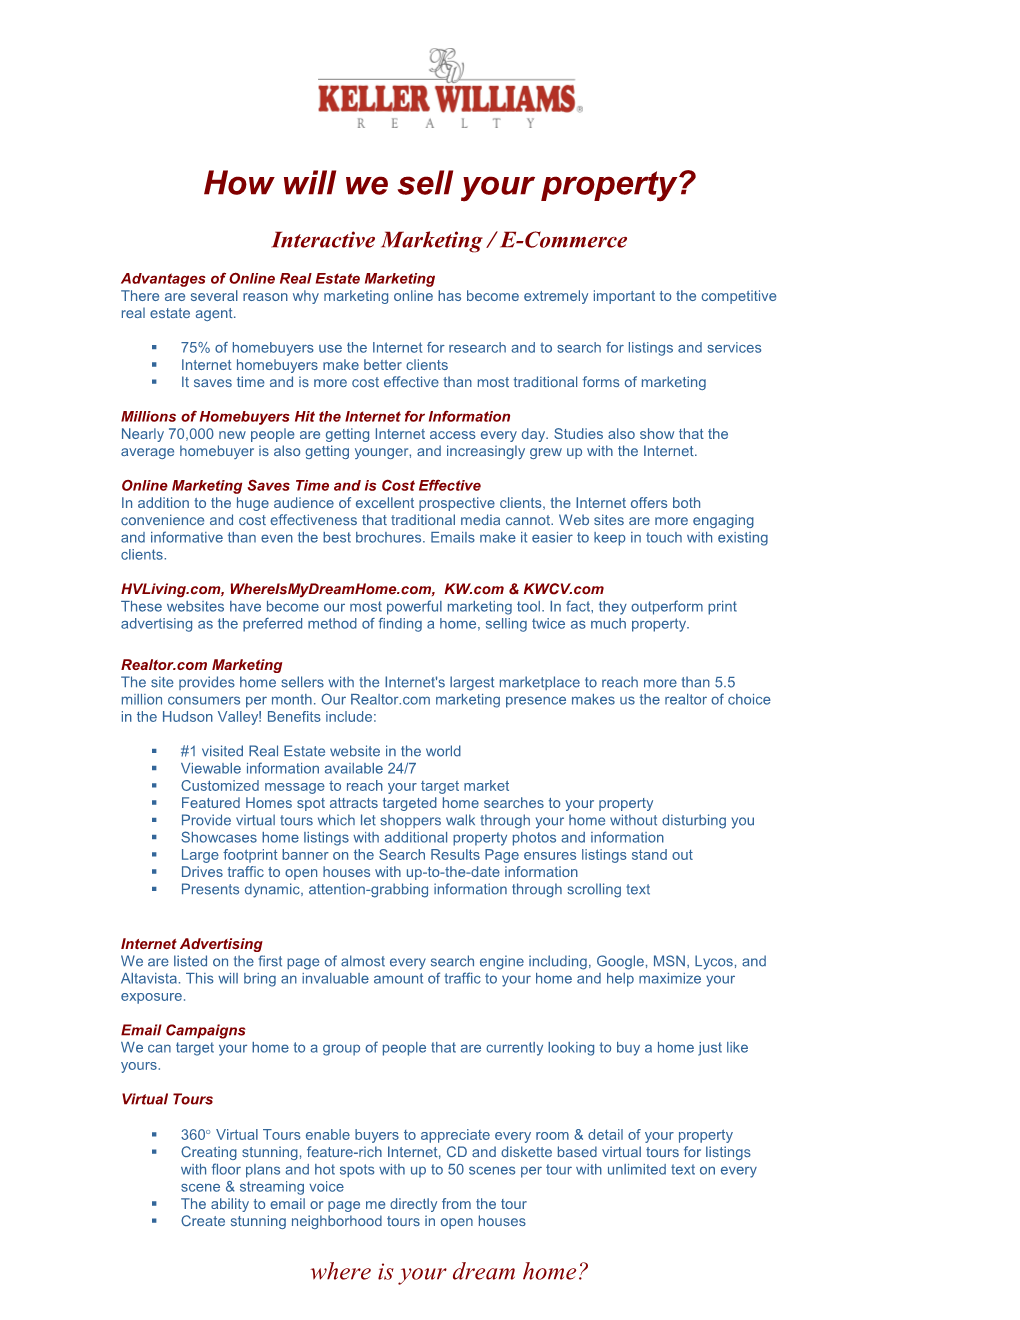 How Will We Sell Your Property?